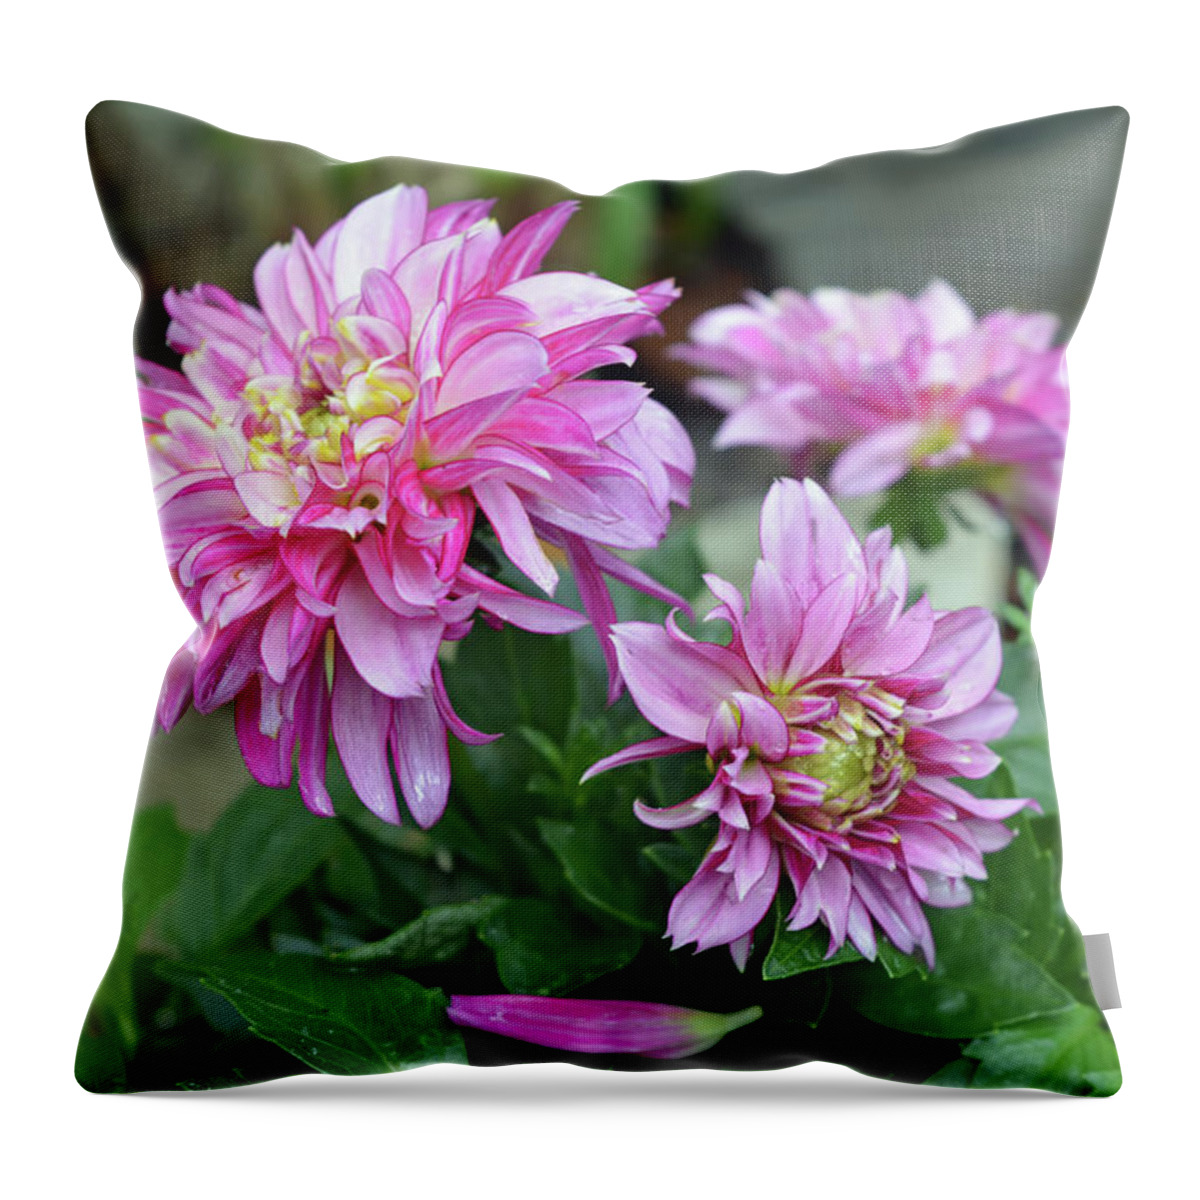 Dahlia Throw Pillow featuring the photograph Pink Dahlia Flowers by Aimee L Maher ALM GALLERY